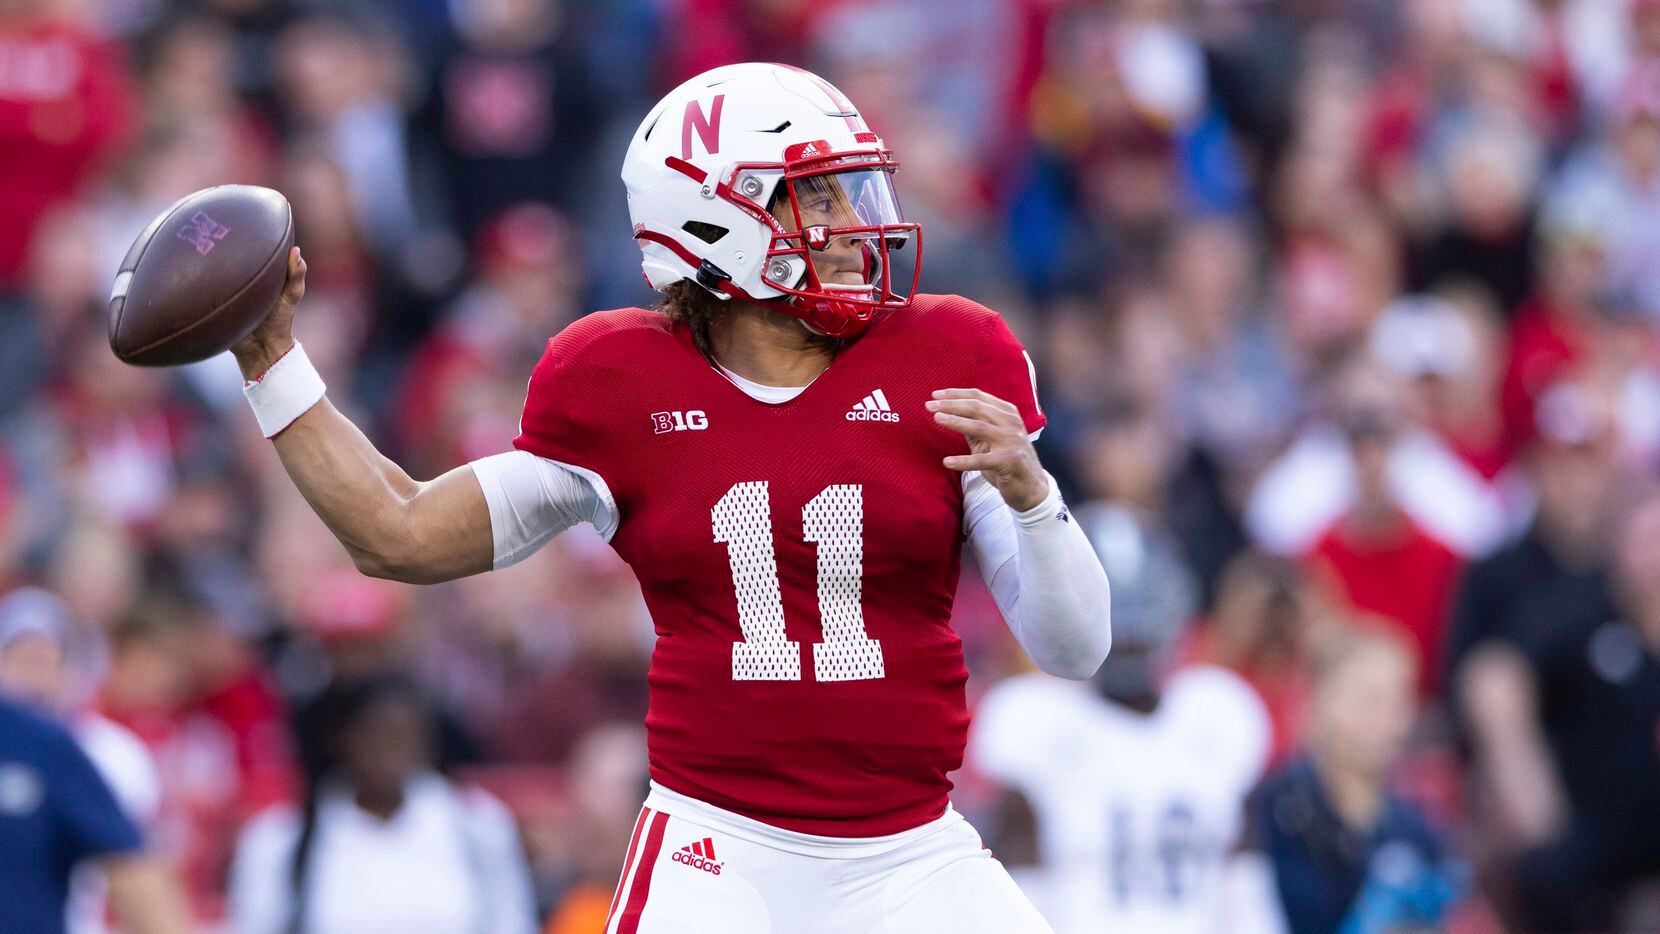 Nebraska quarterback Casey Thompson throws a pass against Georgia Southern during the first...